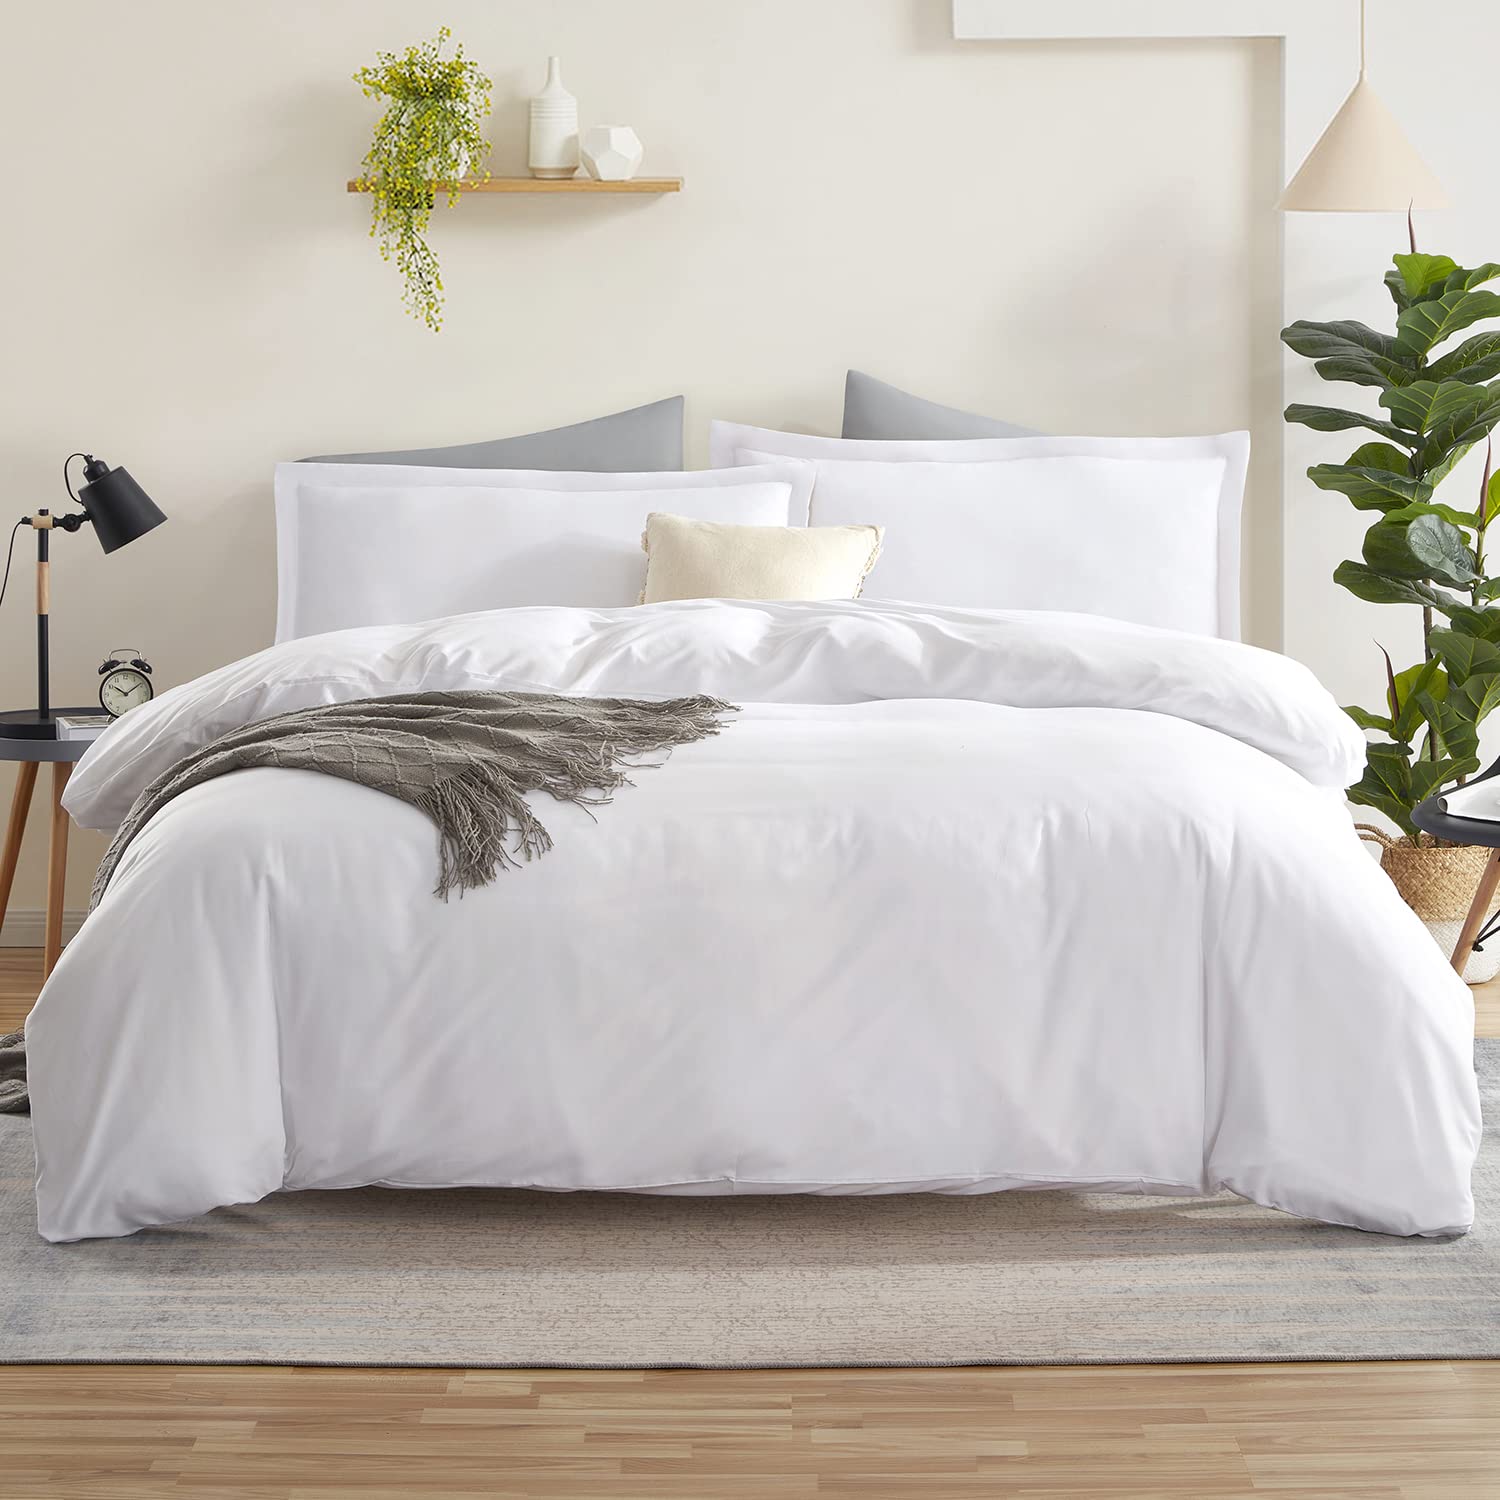 Duvet cover set Buying Guide: How to Choose the Perfect Set for You post thumbnail image